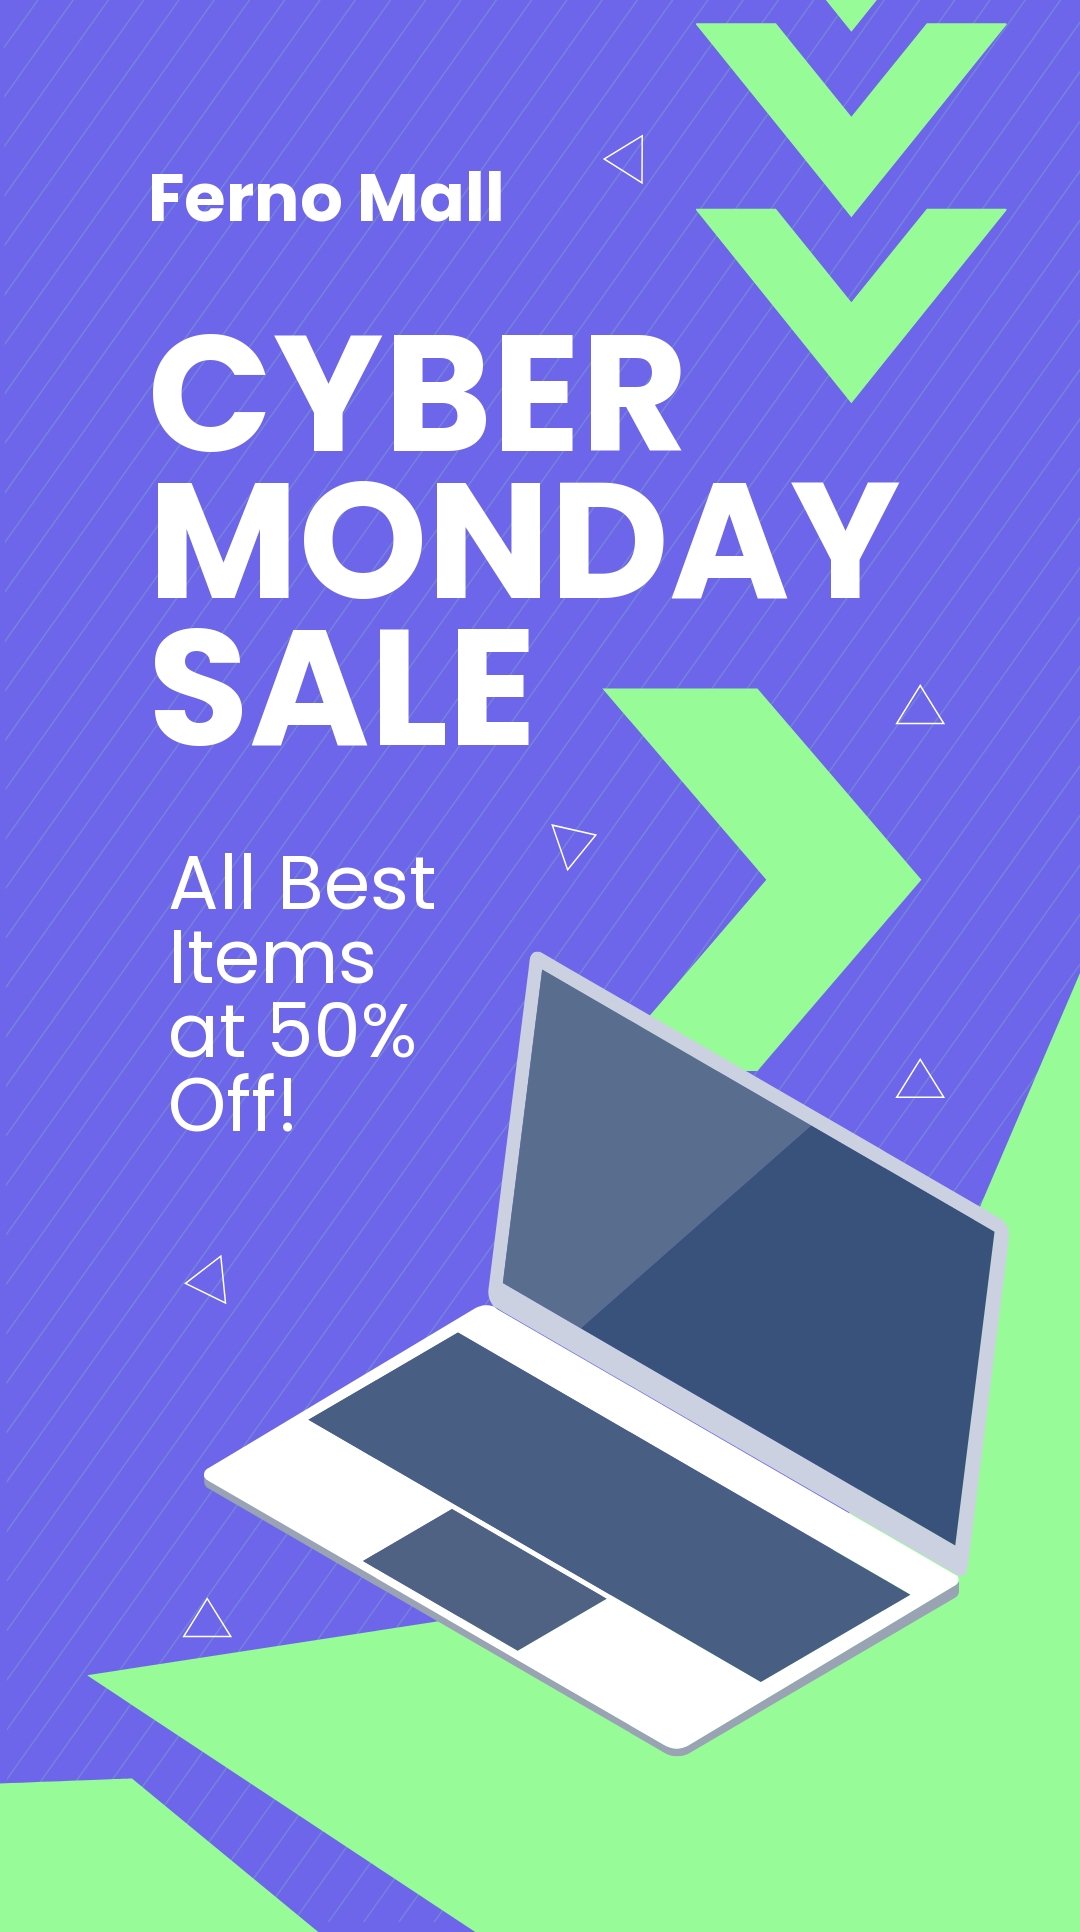 Cyber Monday Sales Event Instagram Story